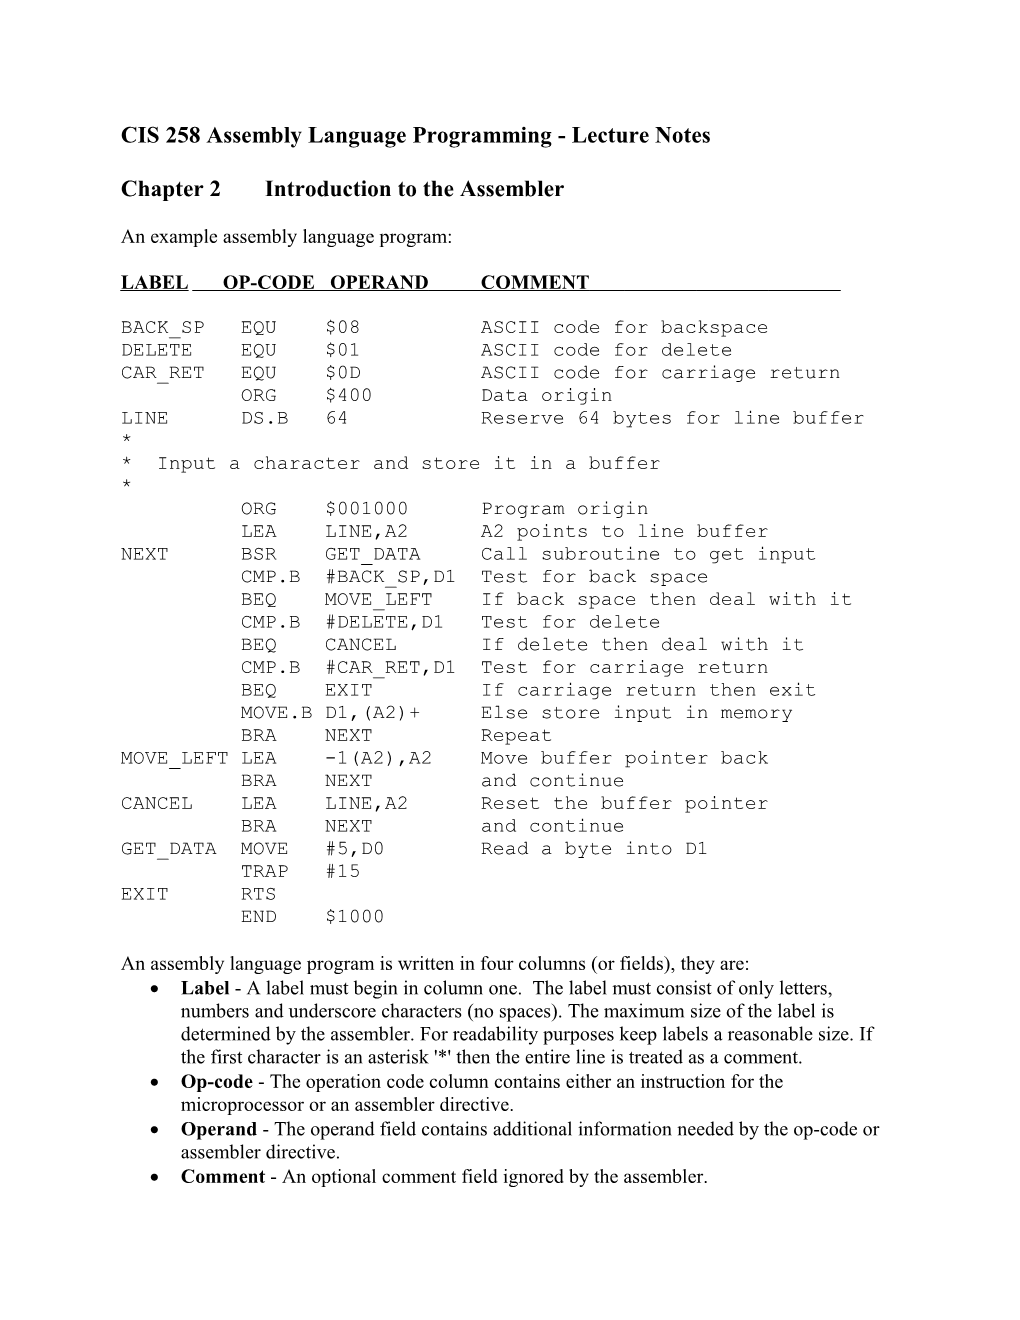 CIS 258 Assembly Language Programming - Lecture Notes